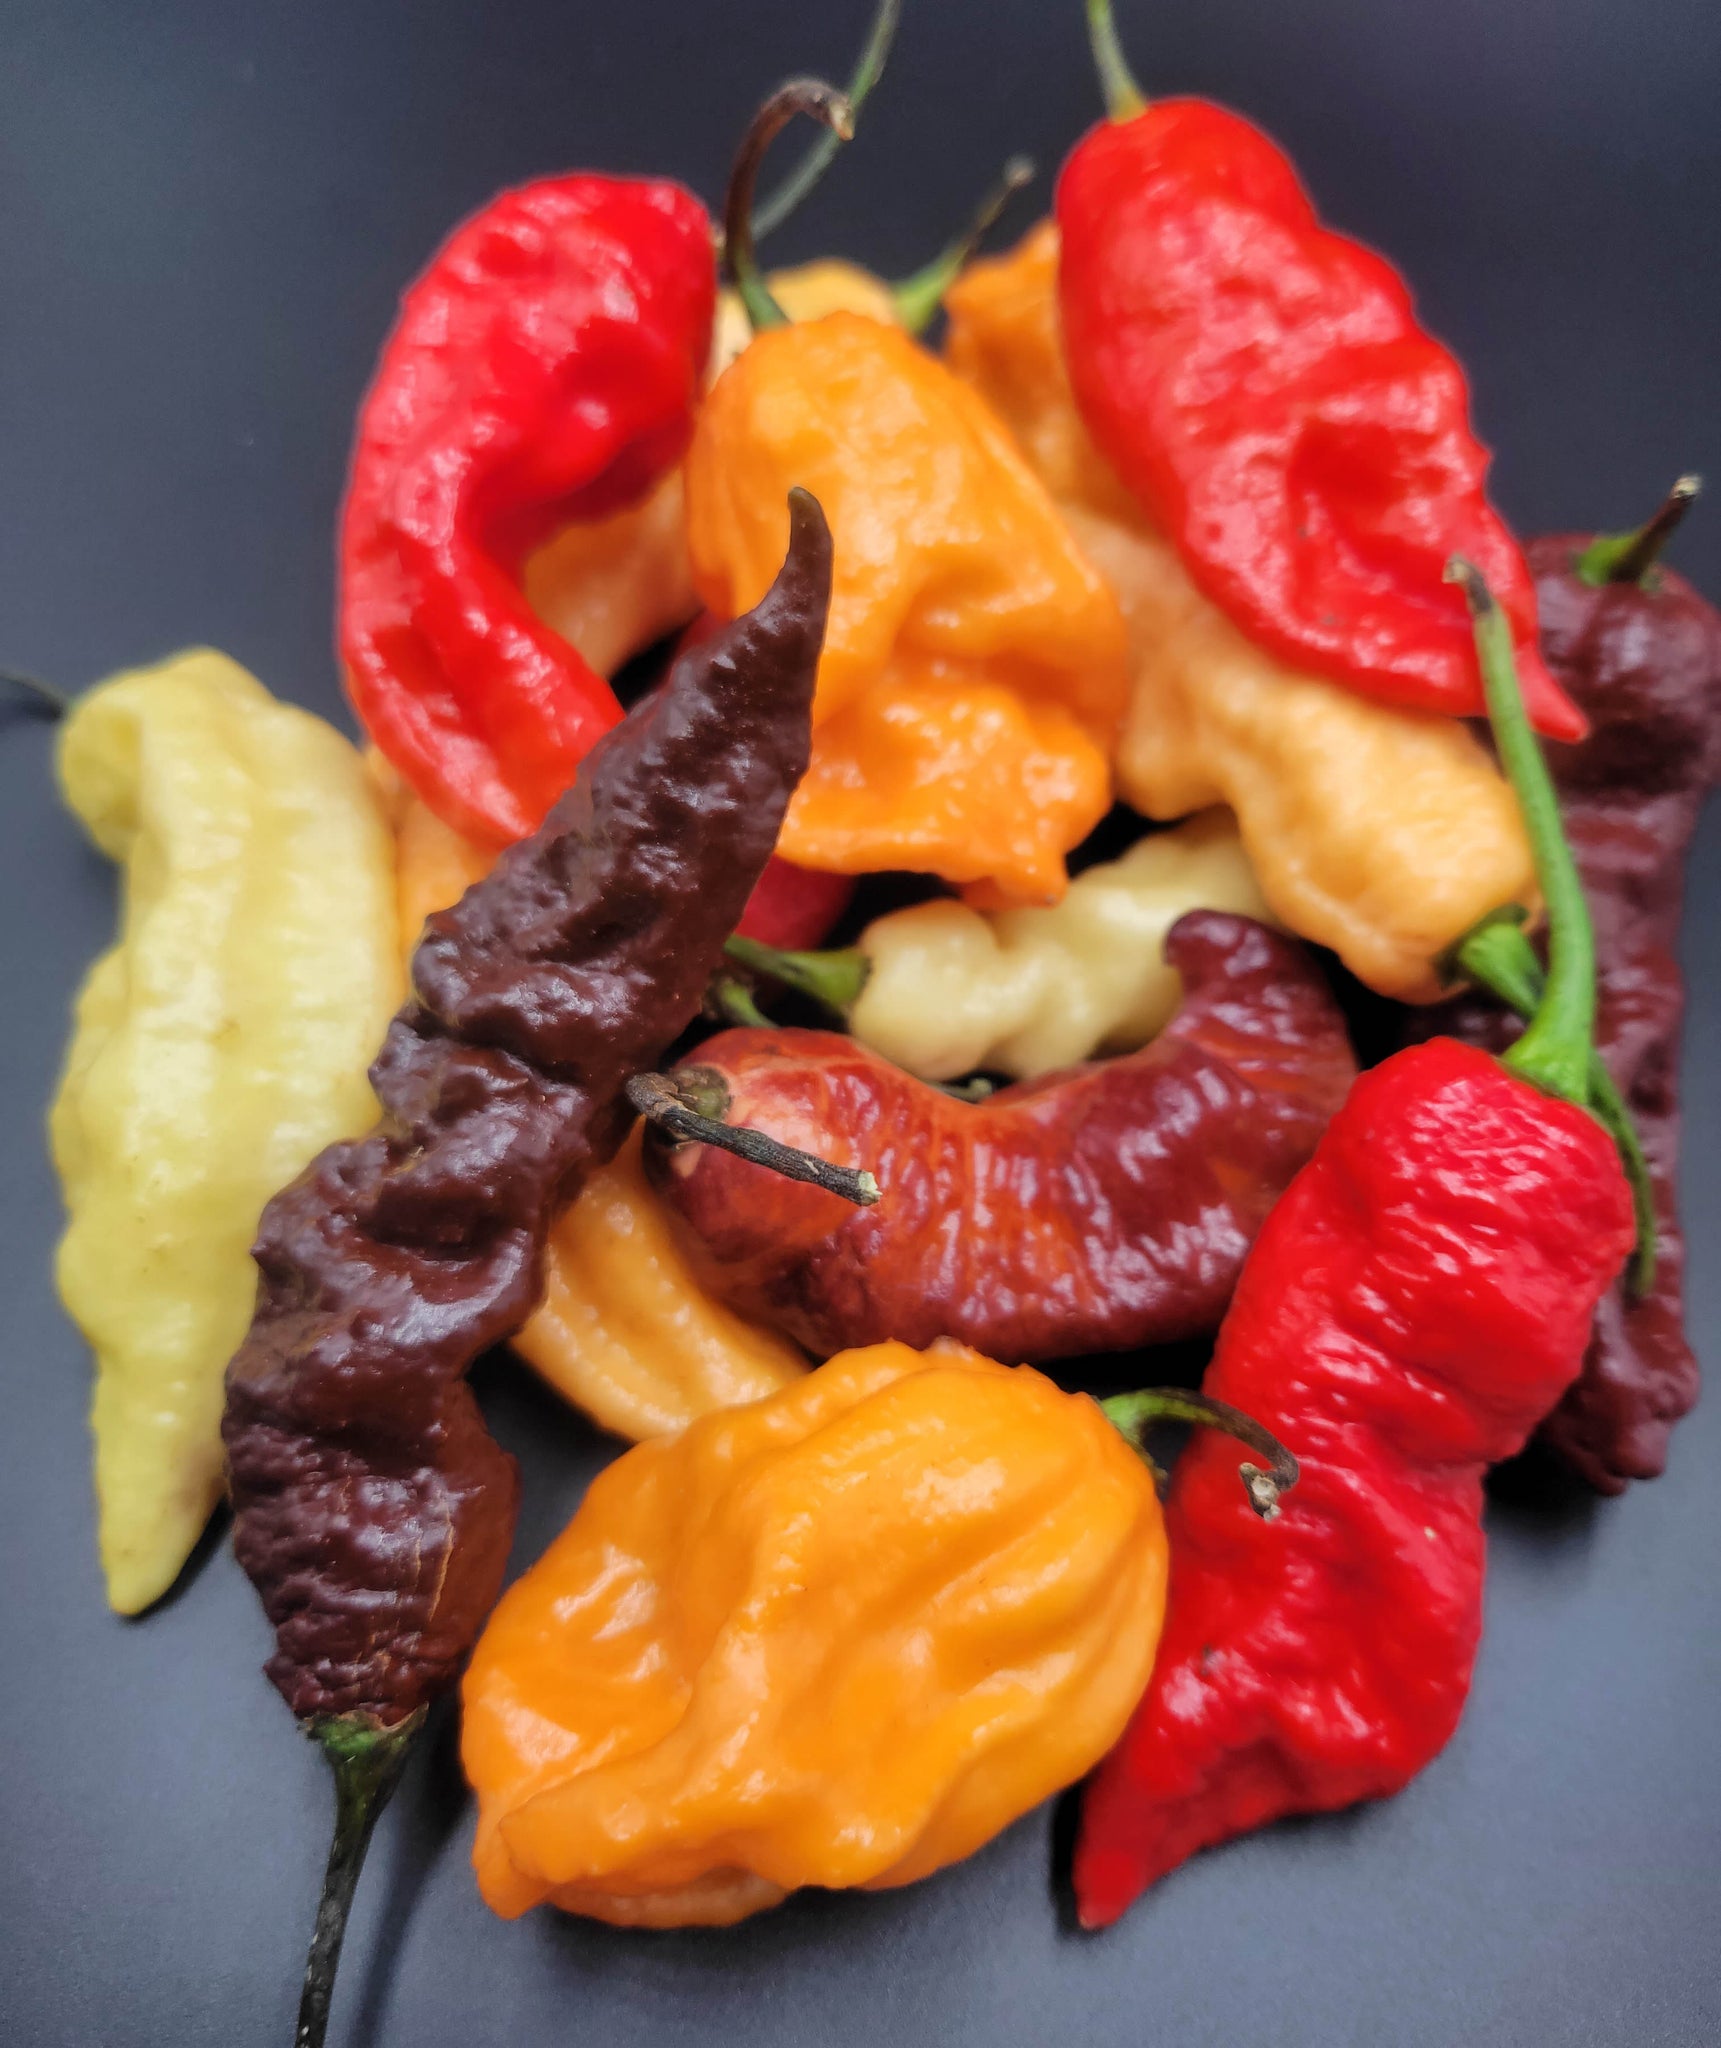 bhut jolokia, ghost peppers, fresh ghost peppers, ghost pepper pods, fresh picked peppers, jays peach ghost scorpion, bhut orange copenhagen, white ghost, fresh pods, pepper pods, hot peppers, super hot peppers, chocolate ghost pepper, pink tiger x peach bhut